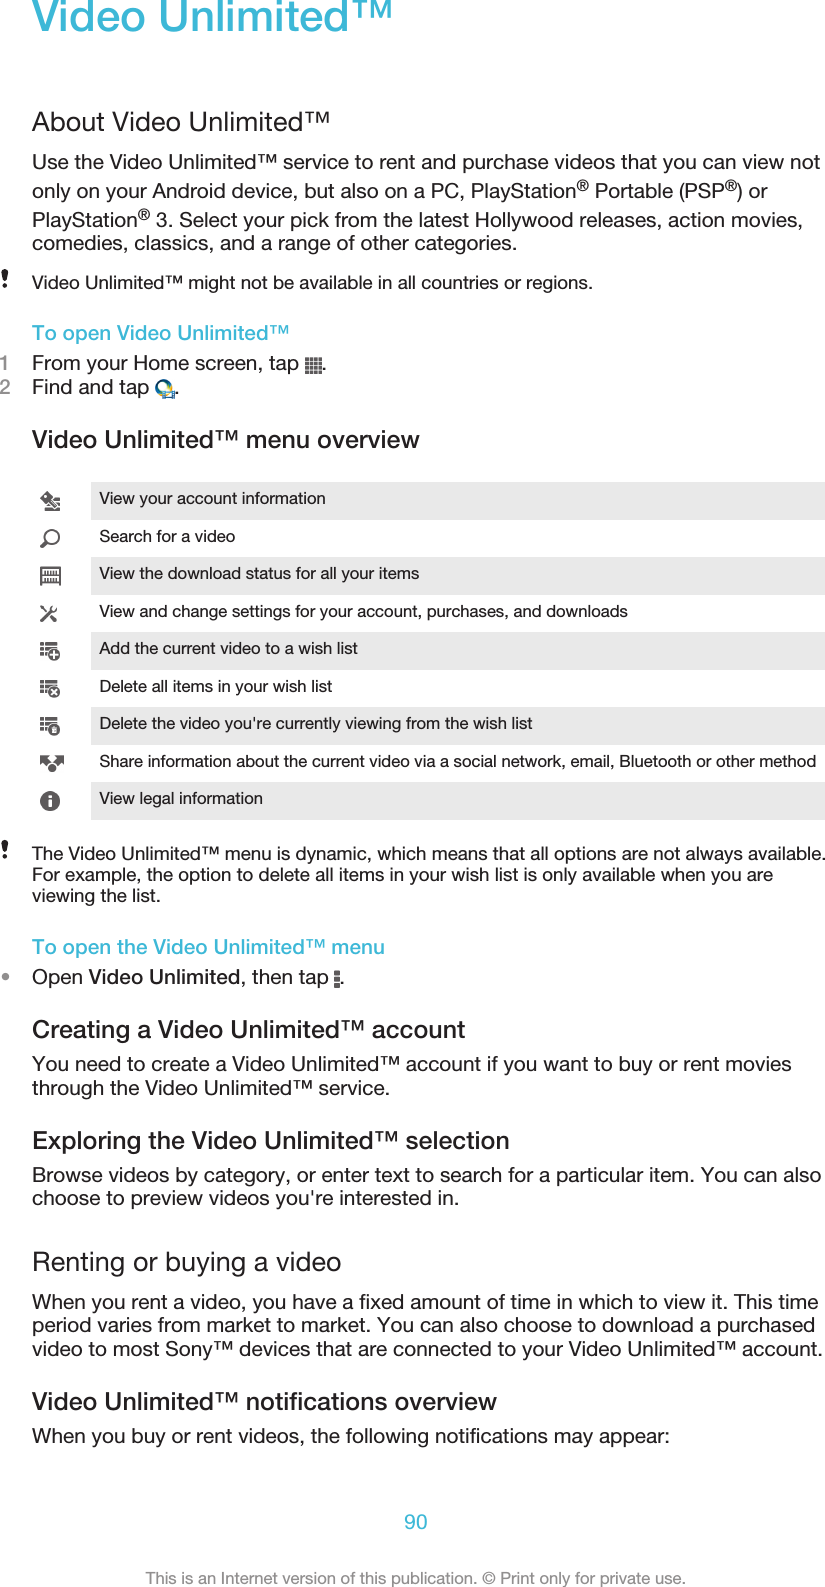 Video Unlimited™About Video Unlimited™Use the Video Unlimited™ service to rent and purchase videos that you can view notonly on your Android device, but also on a PC, PlayStation® Portable (PSP®) orPlayStation® 3. Select your pick from the latest Hollywood releases, action movies,comedies, classics, and a range of other categories.Video Unlimited™ might not be available in all countries or regions.To open Video Unlimited™1From your Home screen, tap  .2Find and tap  .Video Unlimited™ menu overviewView your account informationSearch for a videoView the download status for all your itemsView and change settings for your account, purchases, and downloadsAdd the current video to a wish listDelete all items in your wish listDelete the video you&apos;re currently viewing from the wish listShare information about the current video via a social network, email, Bluetooth or other methodView legal informationThe Video Unlimited™ menu is dynamic, which means that all options are not always available.For example, the option to delete all items in your wish list is only available when you areviewing the list.To open the Video Unlimited™ menu•Open Video Unlimited, then tap  .Creating a Video Unlimited™ accountYou need to create a Video Unlimited™ account if you want to buy or rent moviesthrough the Video Unlimited™ service.Exploring the Video Unlimited™ selectionBrowse videos by category, or enter text to search for a particular item. You can alsochoose to preview videos you&apos;re interested in.Renting or buying a videoWhen you rent a video, you have a fixed amount of time in which to view it. This timeperiod varies from market to market. You can also choose to download a purchasedvideo to most Sony™ devices that are connected to your Video Unlimited™ account.Video Unlimited™ notifications overviewWhen you buy or rent videos, the following notifications may appear:90This is an Internet version of this publication. © Print only for private use.